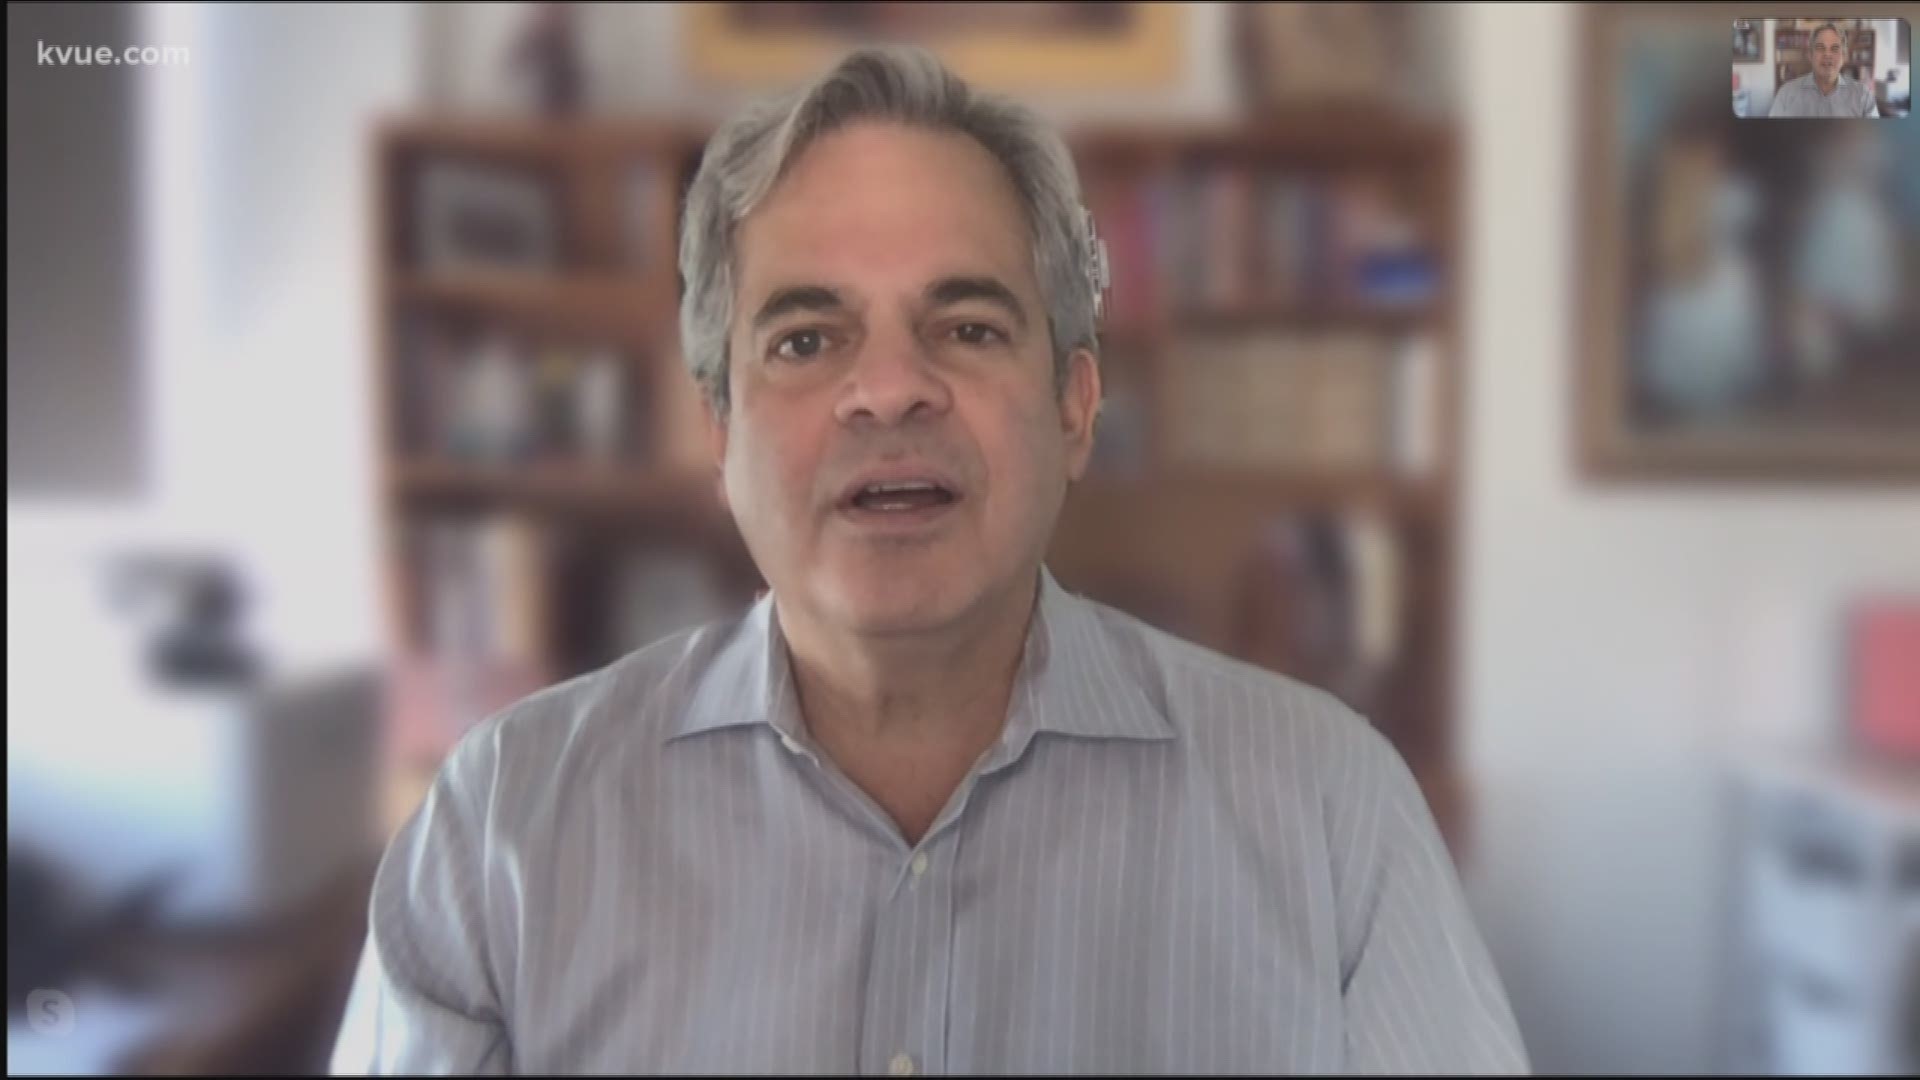 Austin Mayor Steve Adler joins us to share his opinions as Texas readies to reopen salons and barbershops.